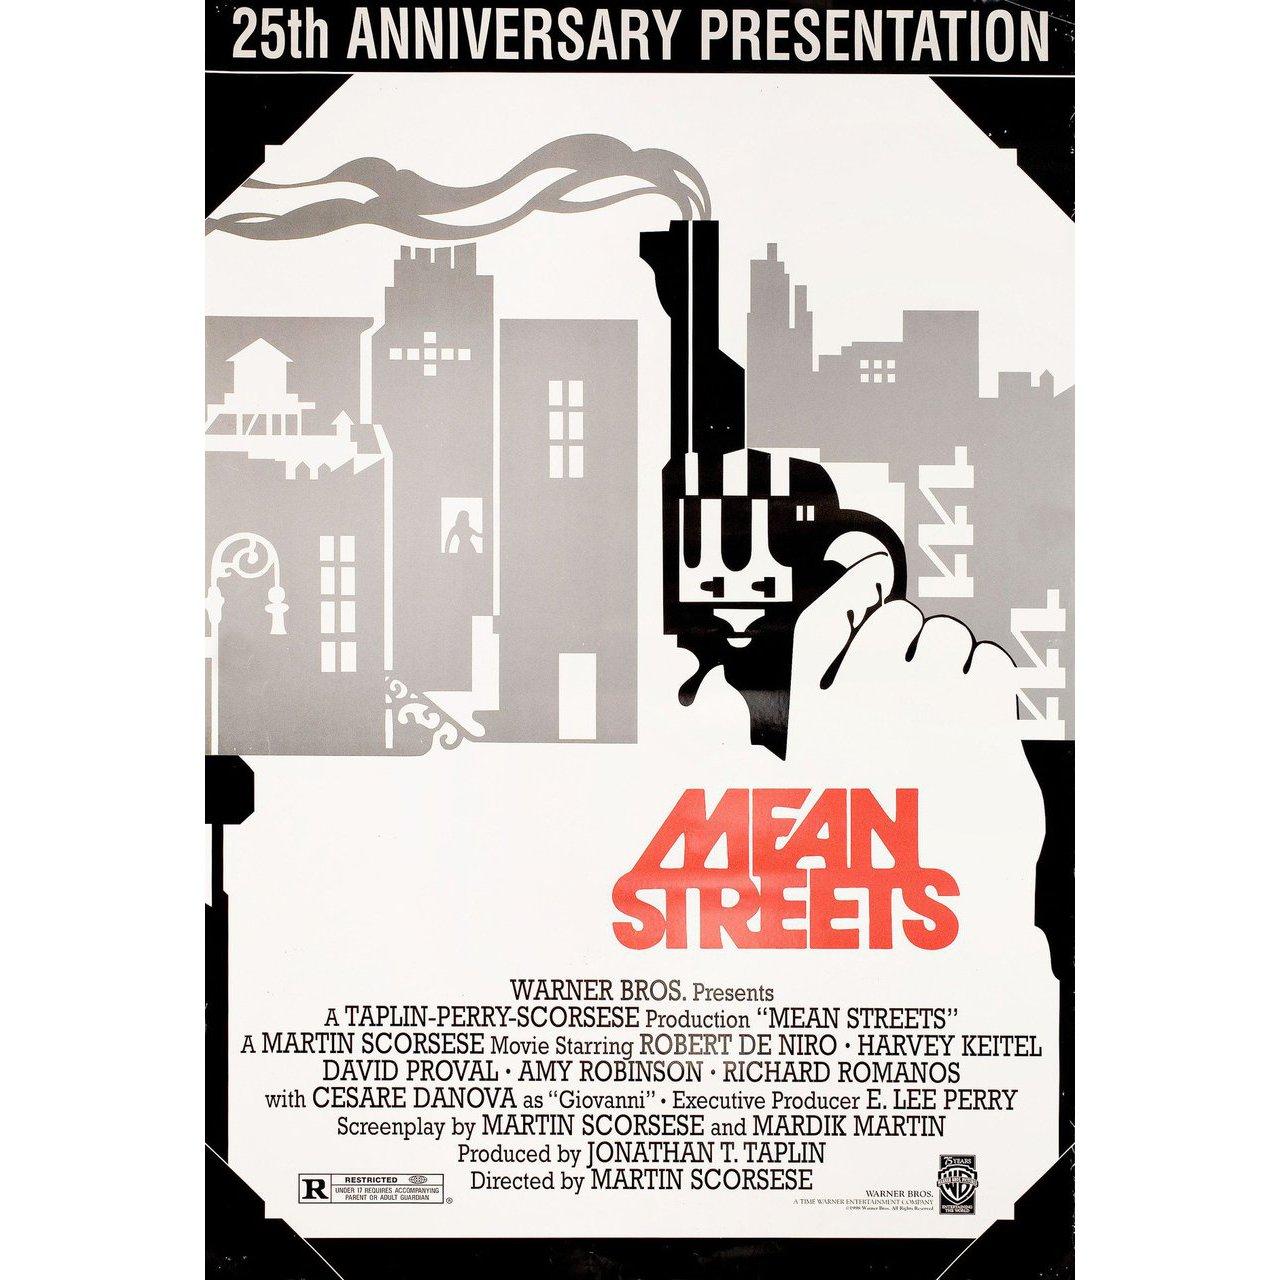 Original 1998 re-release U.S. one sheet poster for the 1973 film Mean Streets directed by Martin Scorsese with Robert De Niro / Harvey Keitel / David Proval / Amy Robinson. Very good-fine condition, rolled with edge wear and pinholes. Please note: